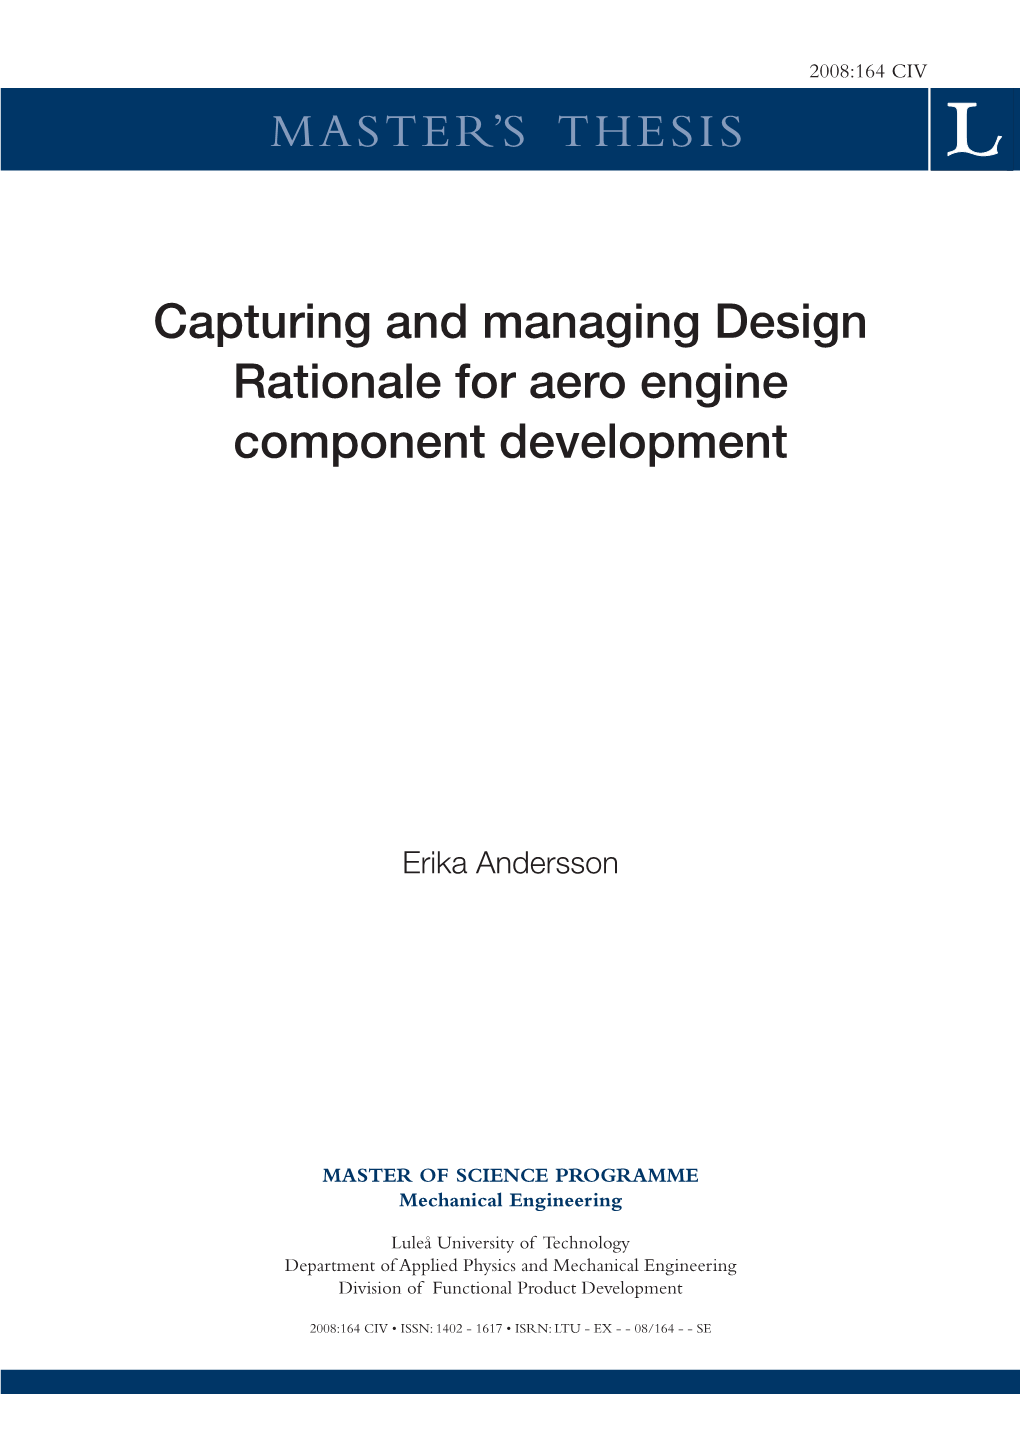 Capturing and Managing Design Rationale for Aero Engine Component Development